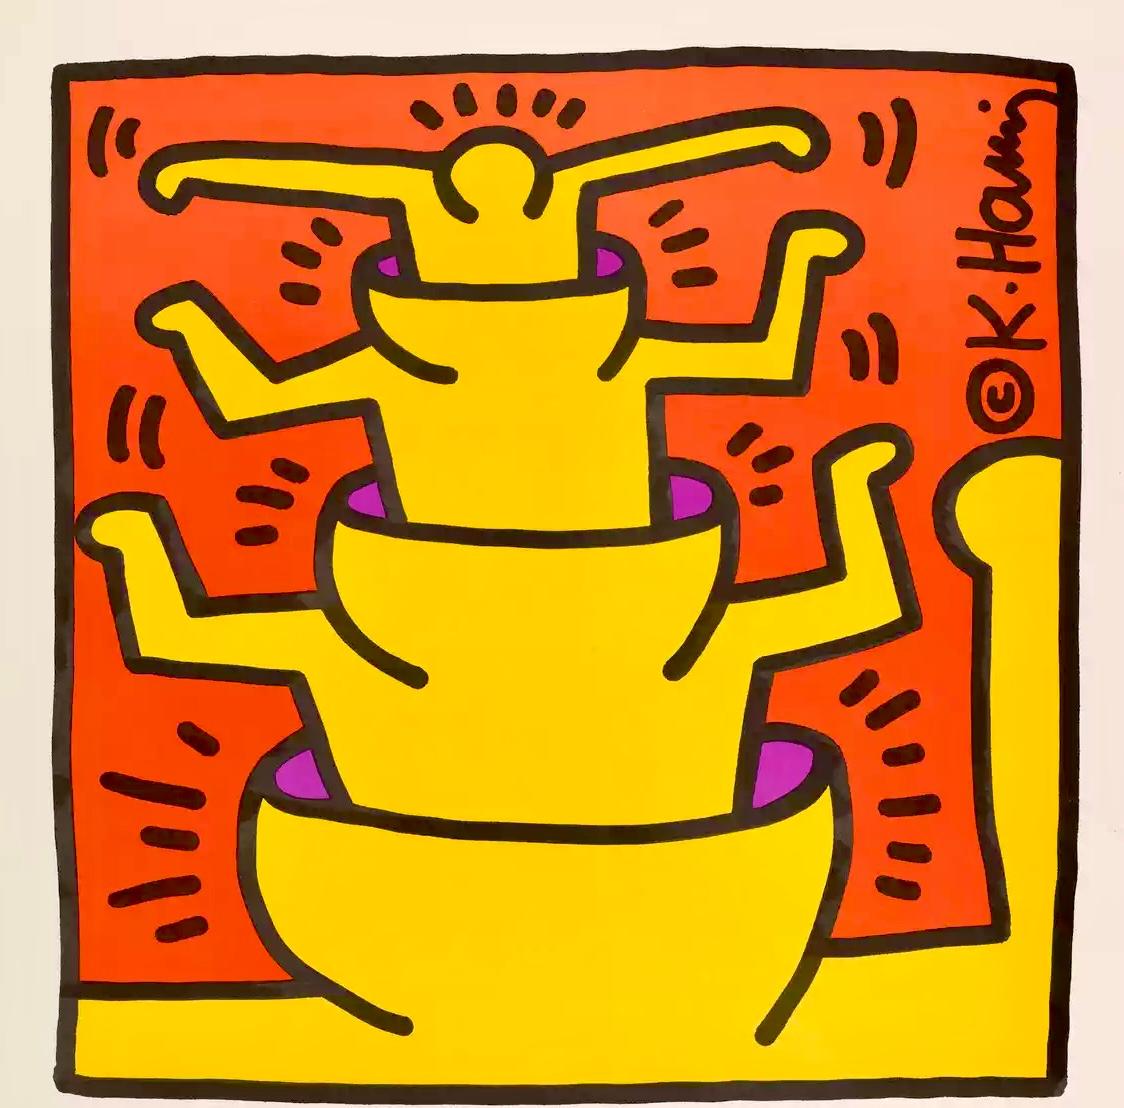 Keith Haring Learning Through Art (Keith Haring Guggenheim)  - Print by (after) Keith Haring